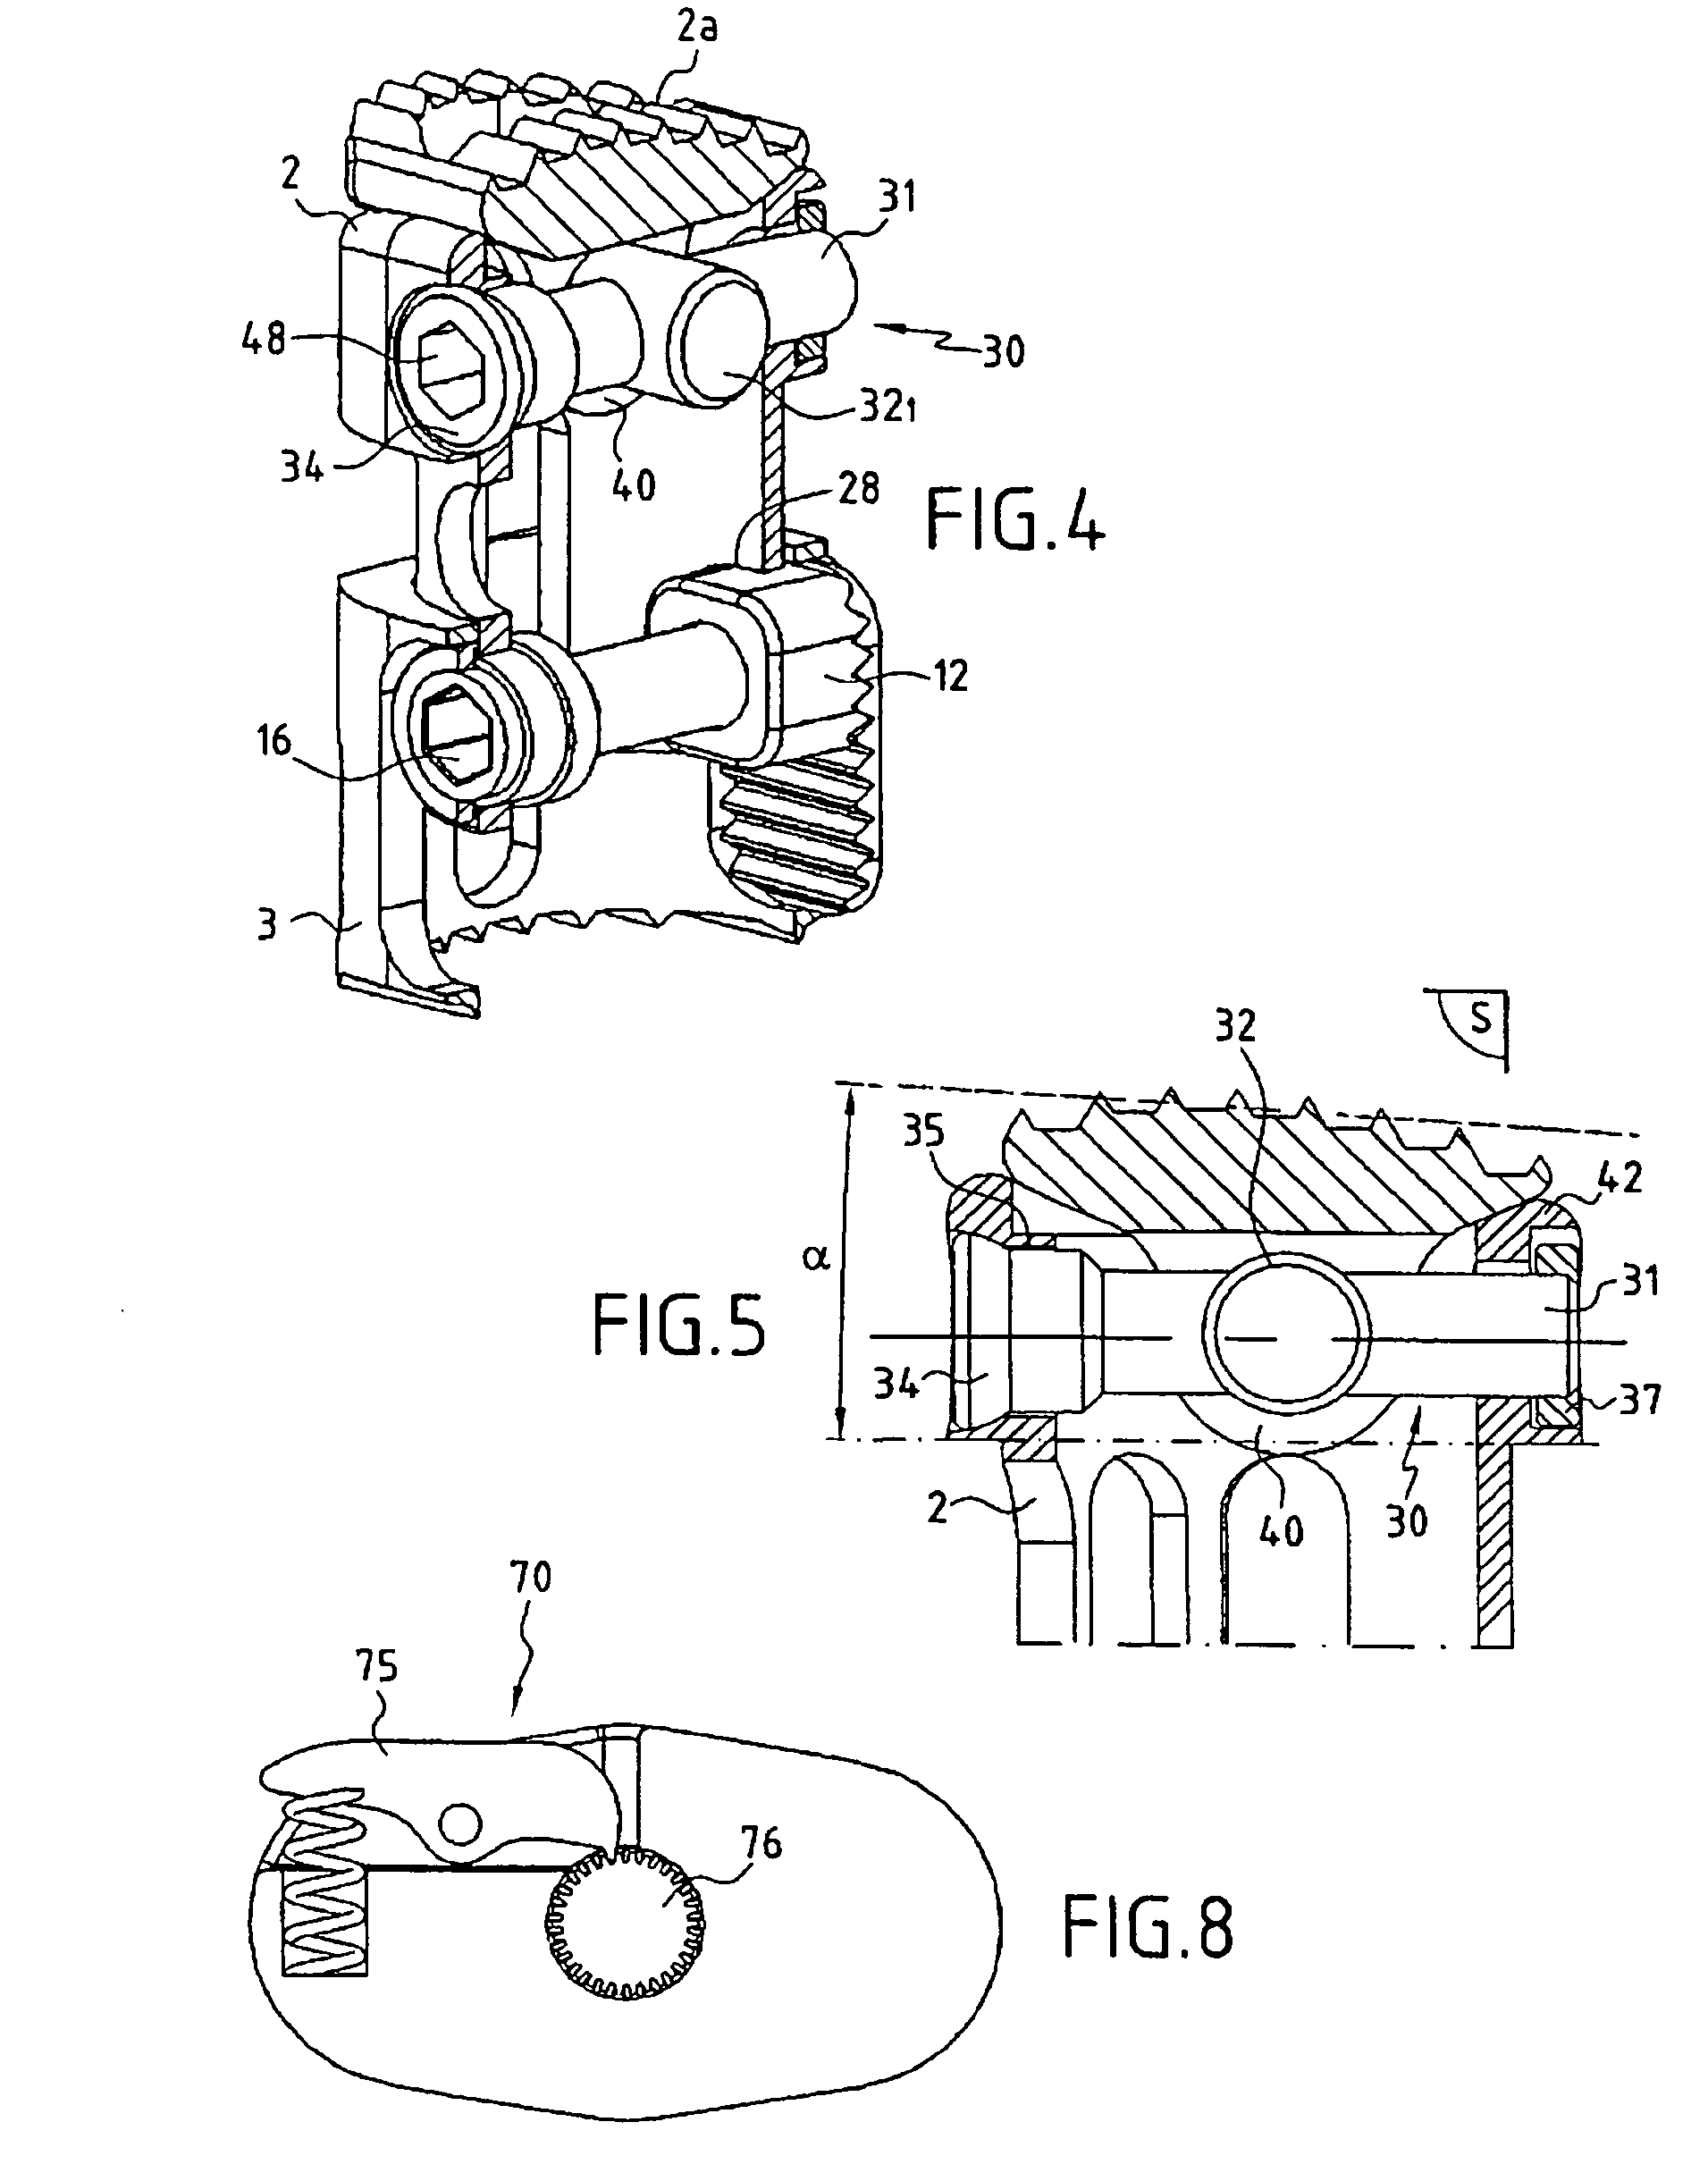 Vertebral replacement and distraction device for placing said implant